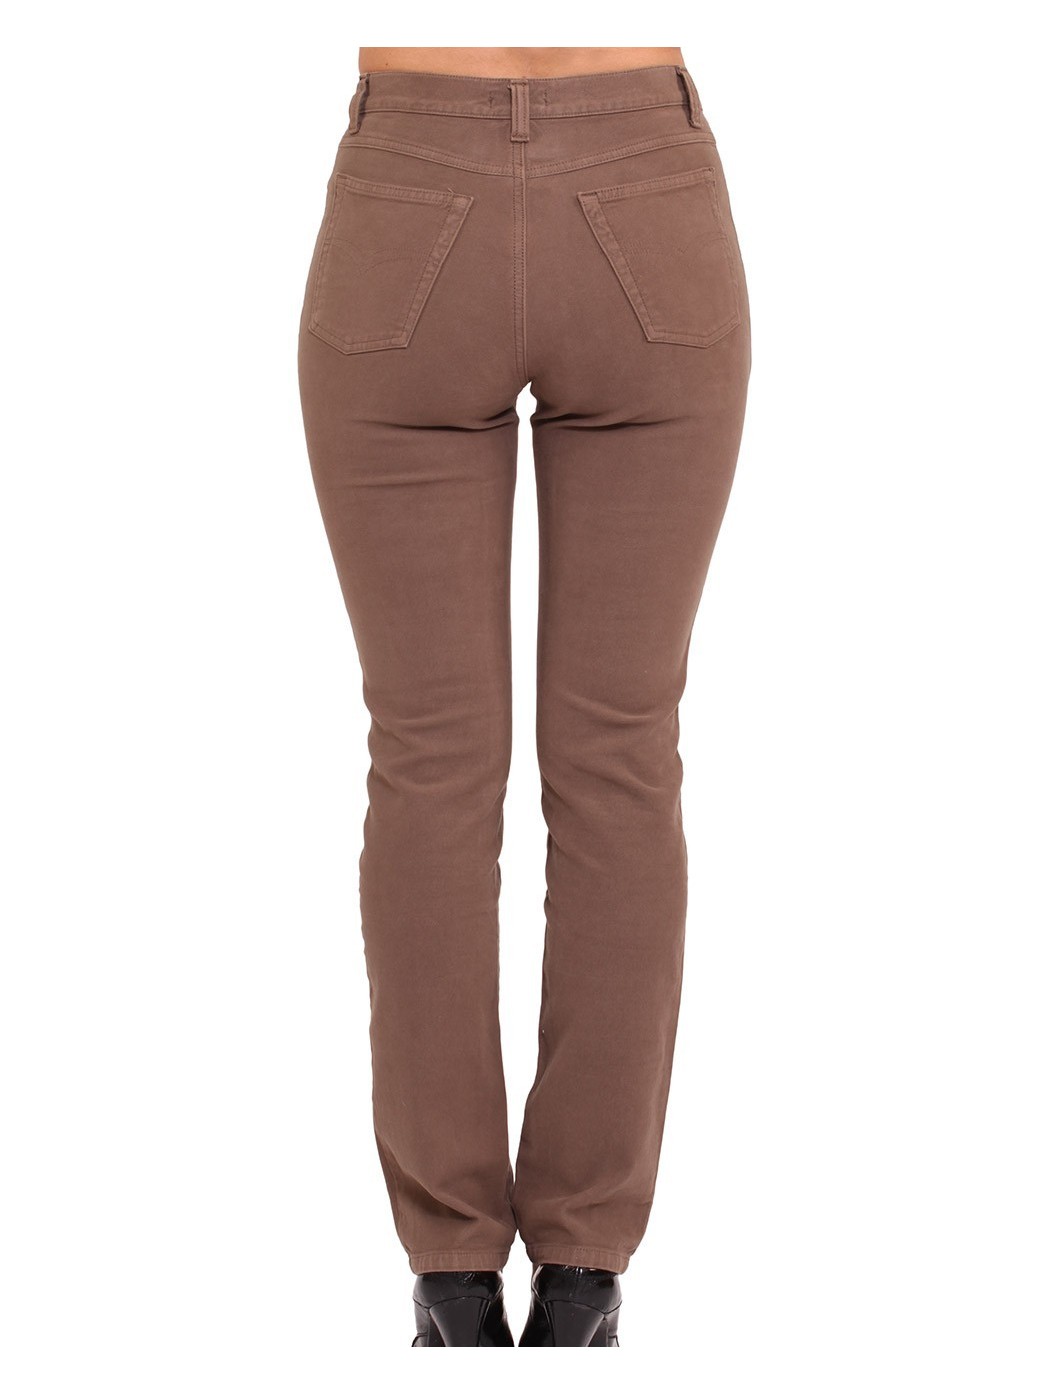 Shop online Musetti trousers